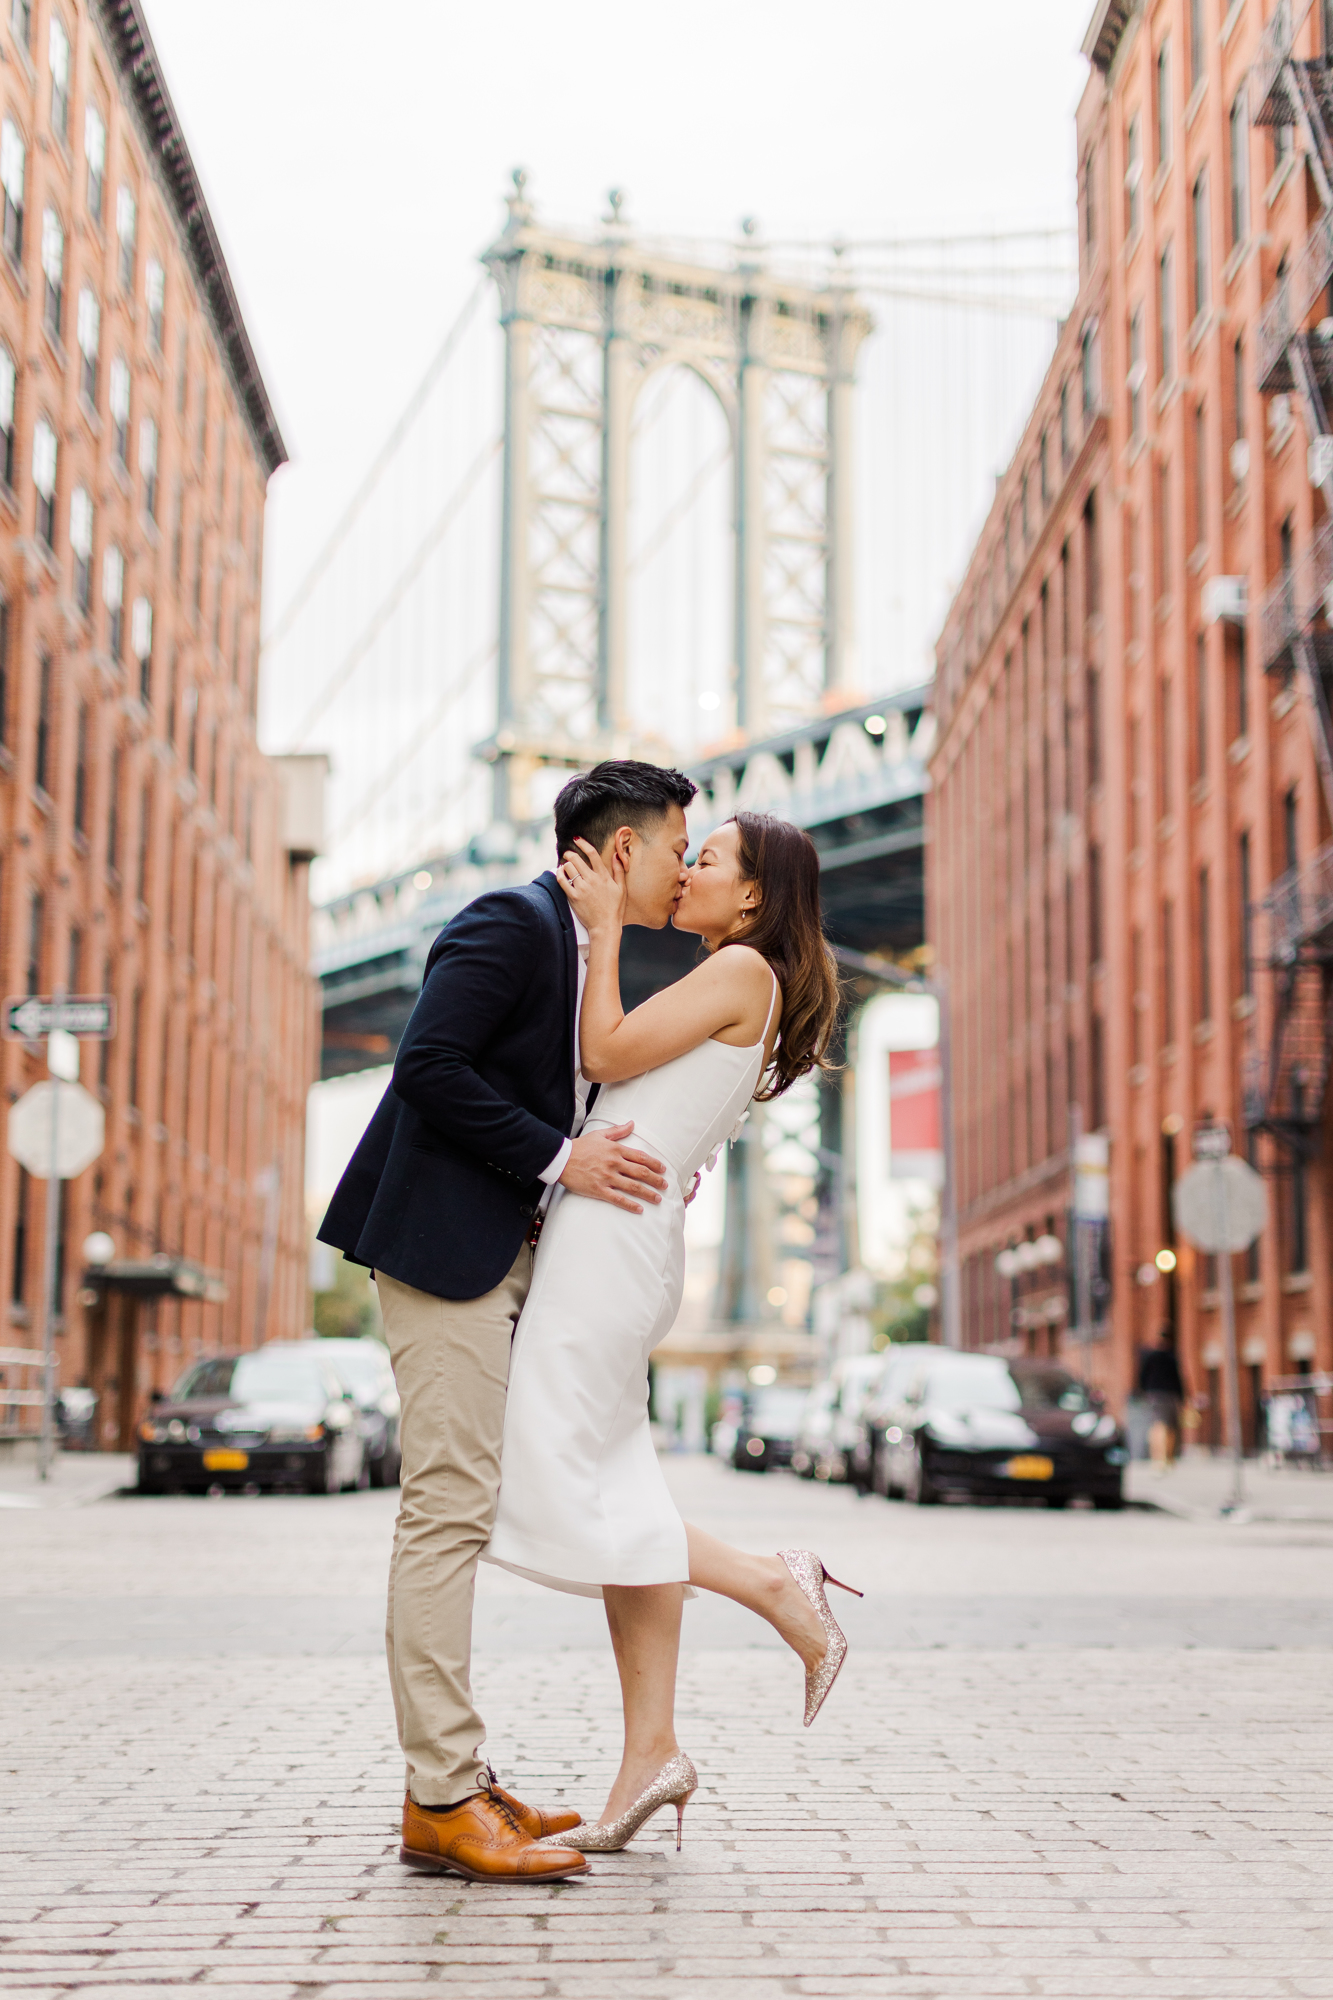 The Best Time of Year for Radiant DUMBO Engagement Photos